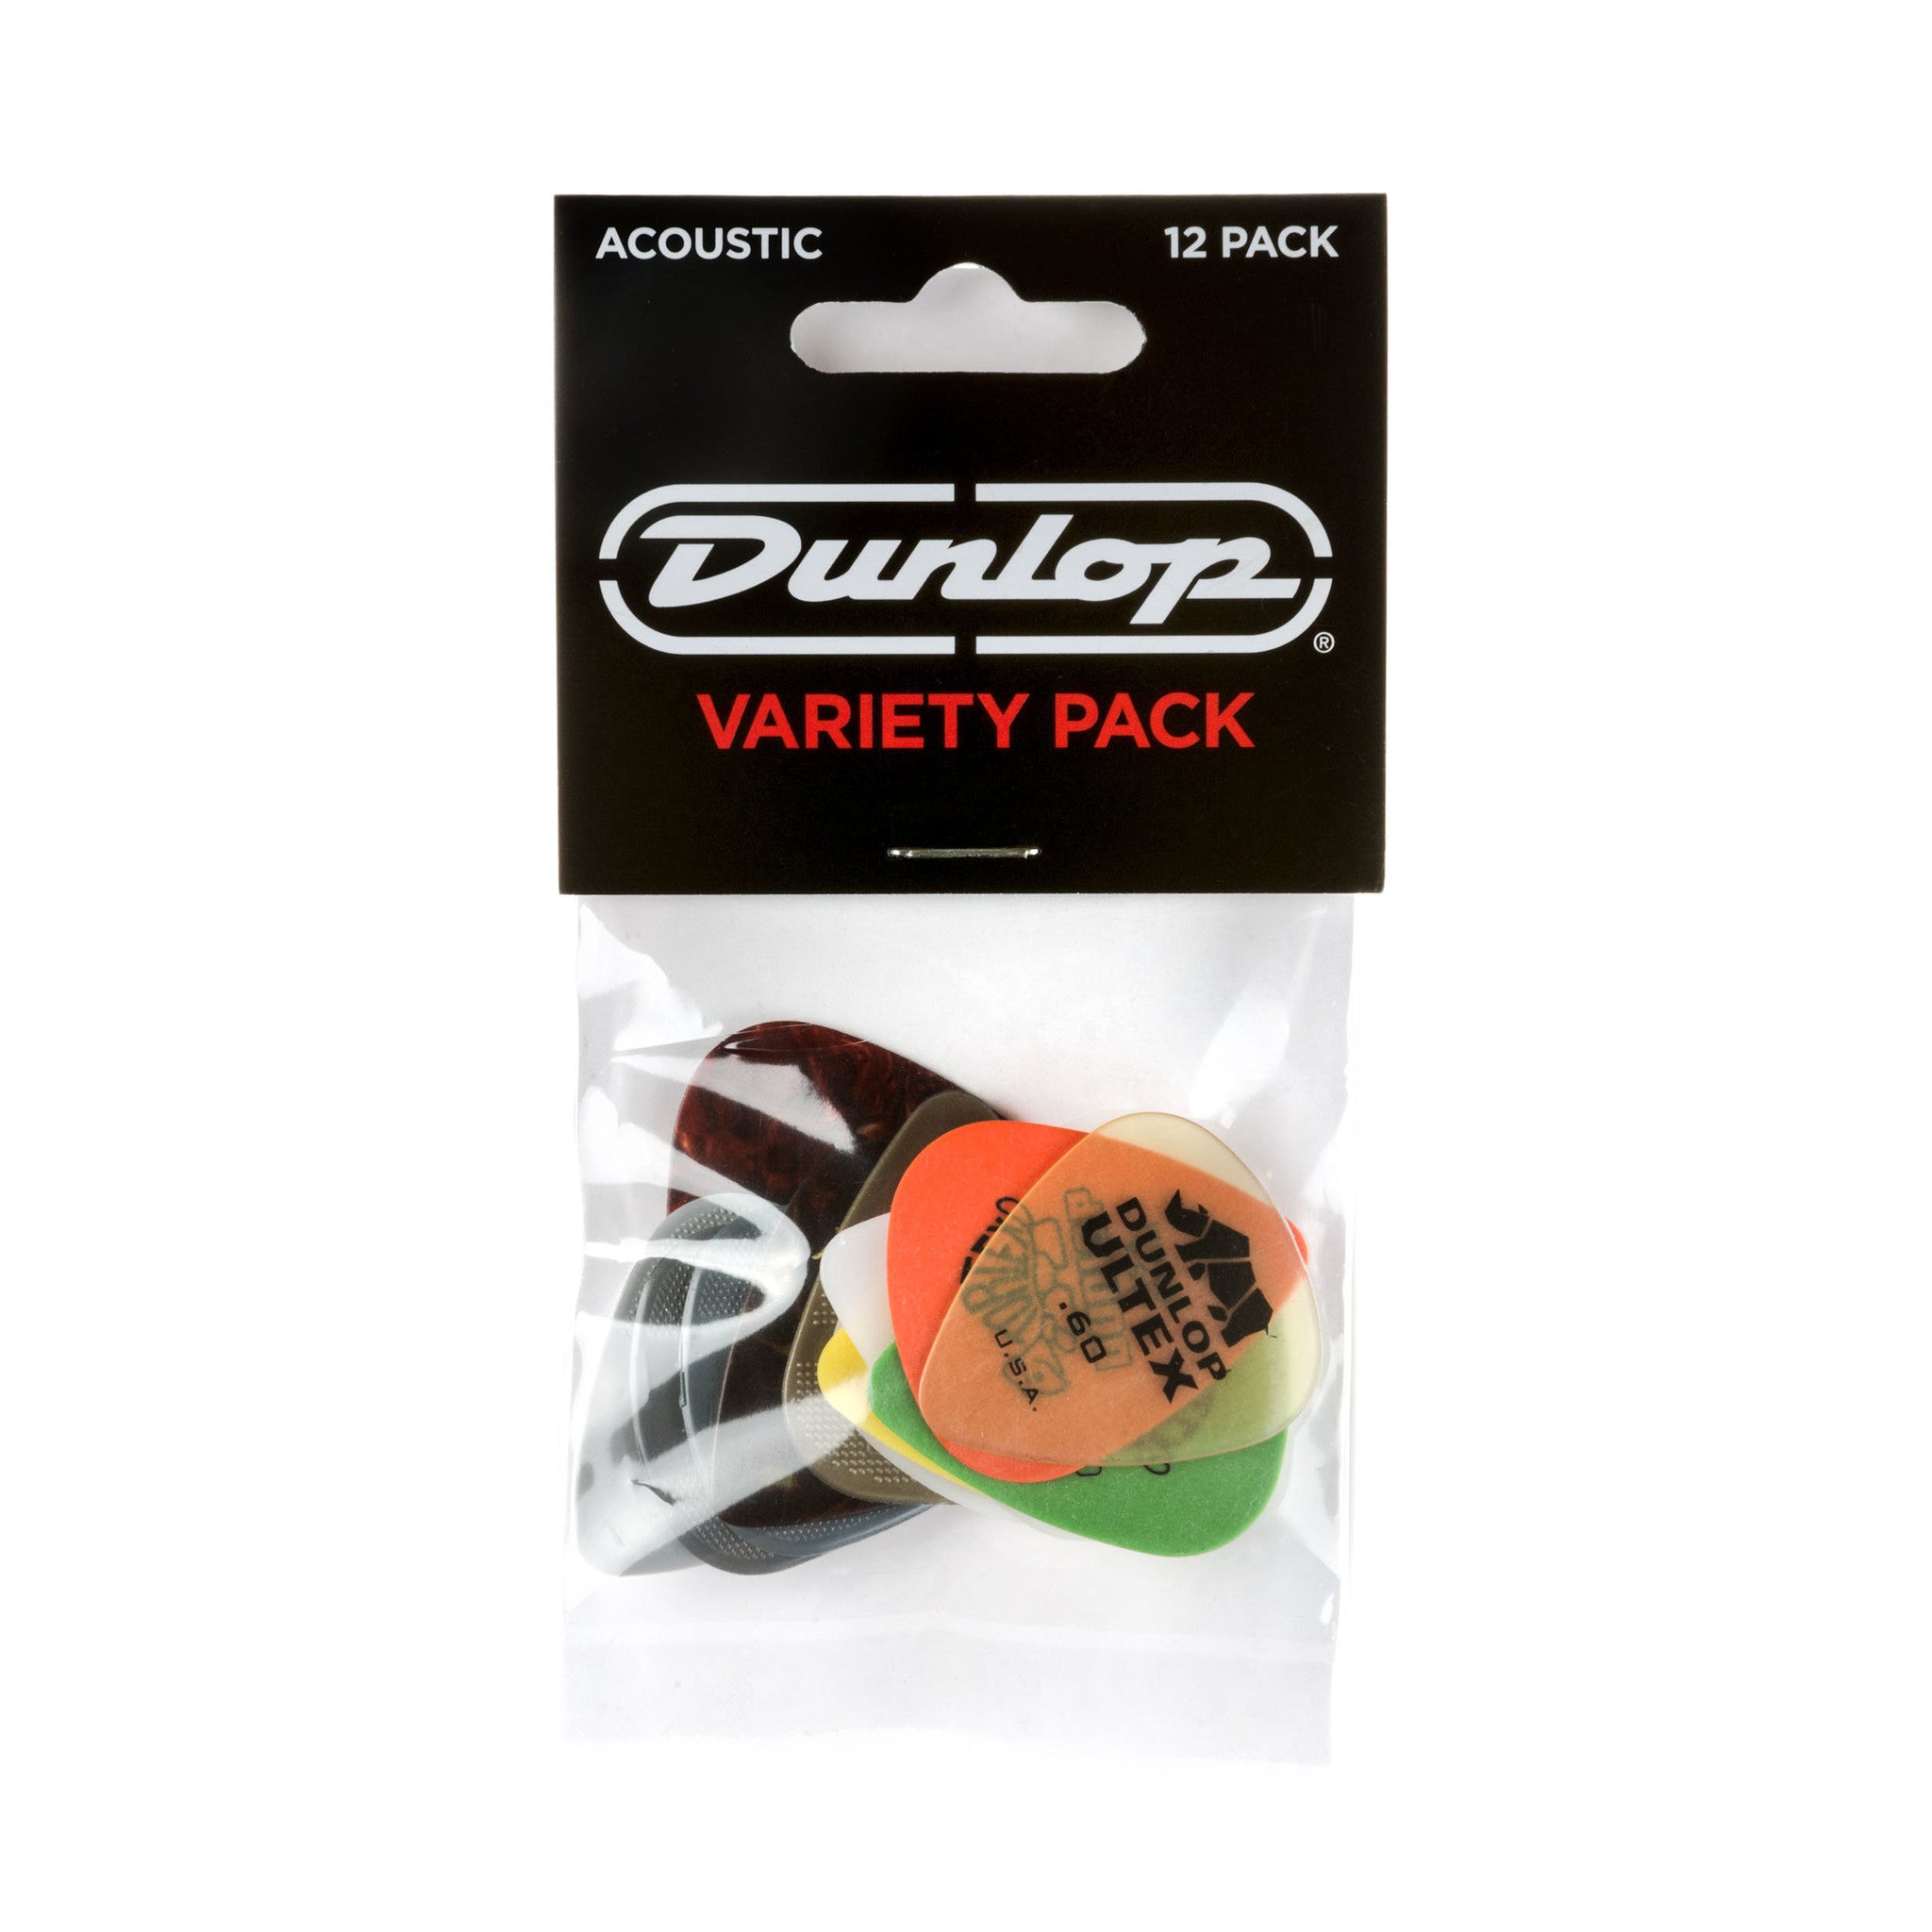 Dunlop Player's Acoustic Guitar Pick Variety Pack - 12 Pc